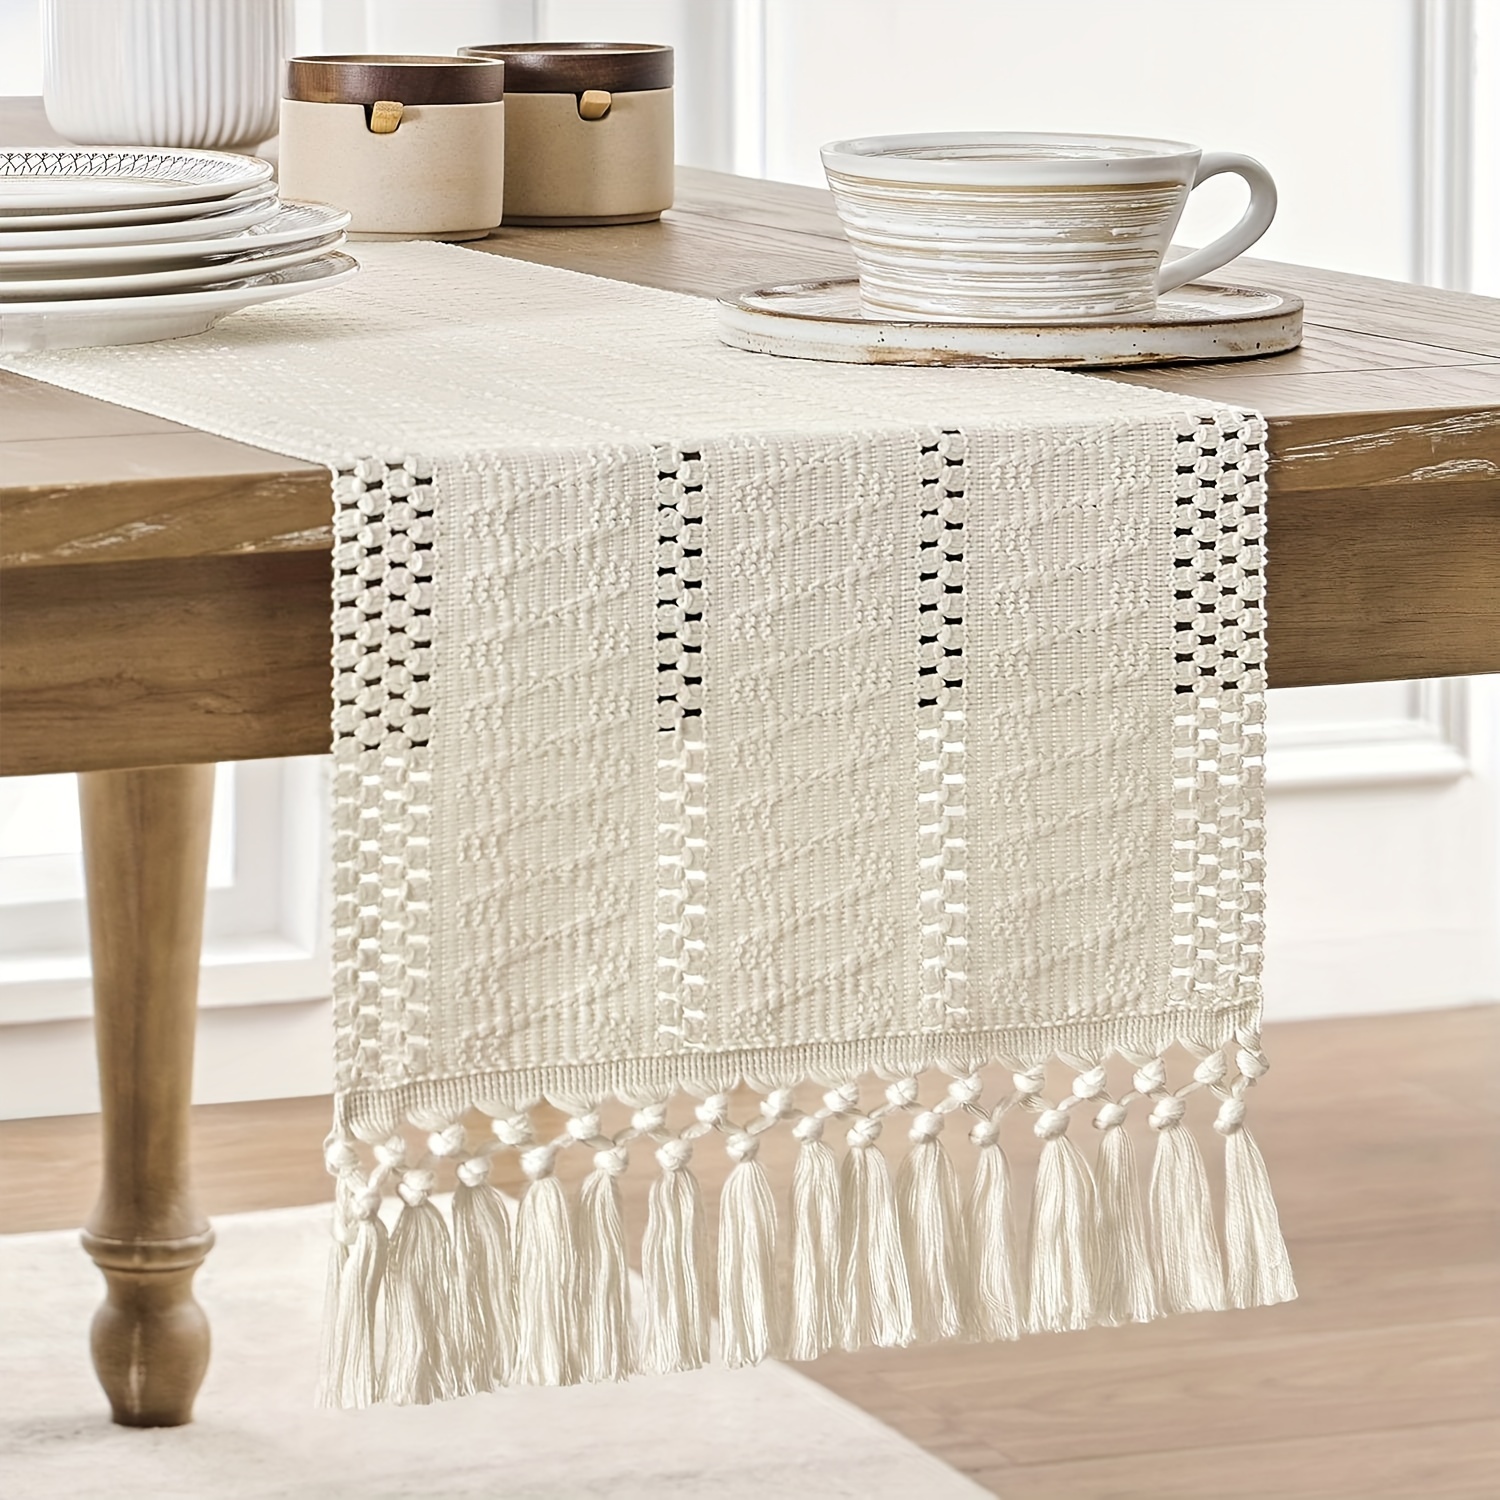 

Bohemian Macrame Crochet Polyester Table Runner With Tassels - Solid Color Woven Rectangle Farmhouse Rustic Boho Splicing Table Runner For Wedding, Dining, Party, Holiday, And Home Decor